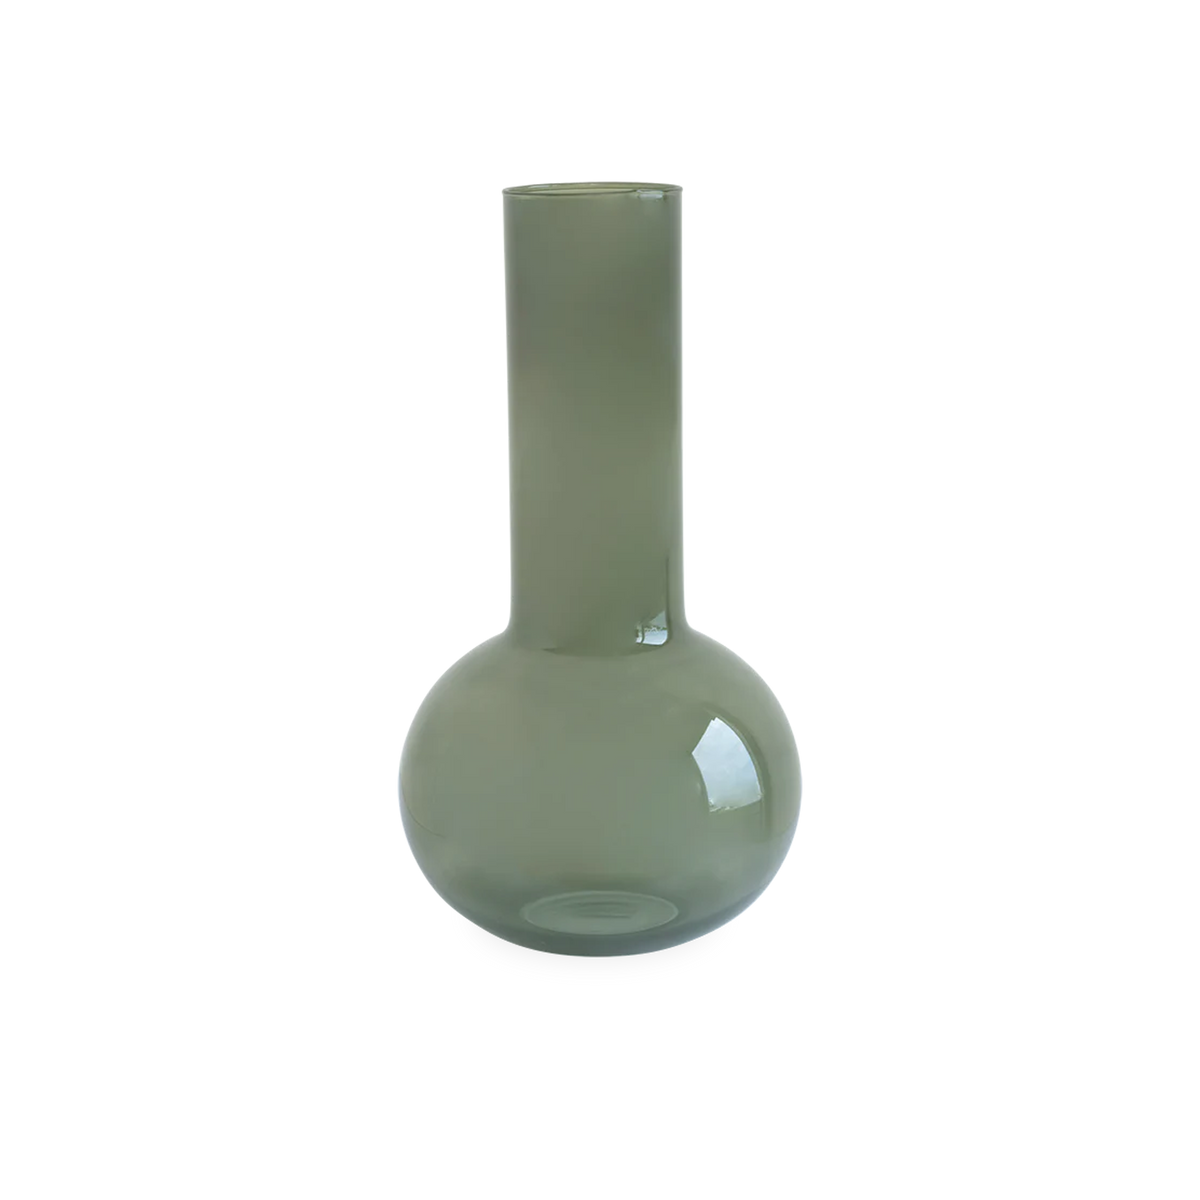 Combining modern design with sustainable values, the Tall Neck Glass Vase features a serene silhouette consisting of a spherical base that is complemented with an elegant, slender 